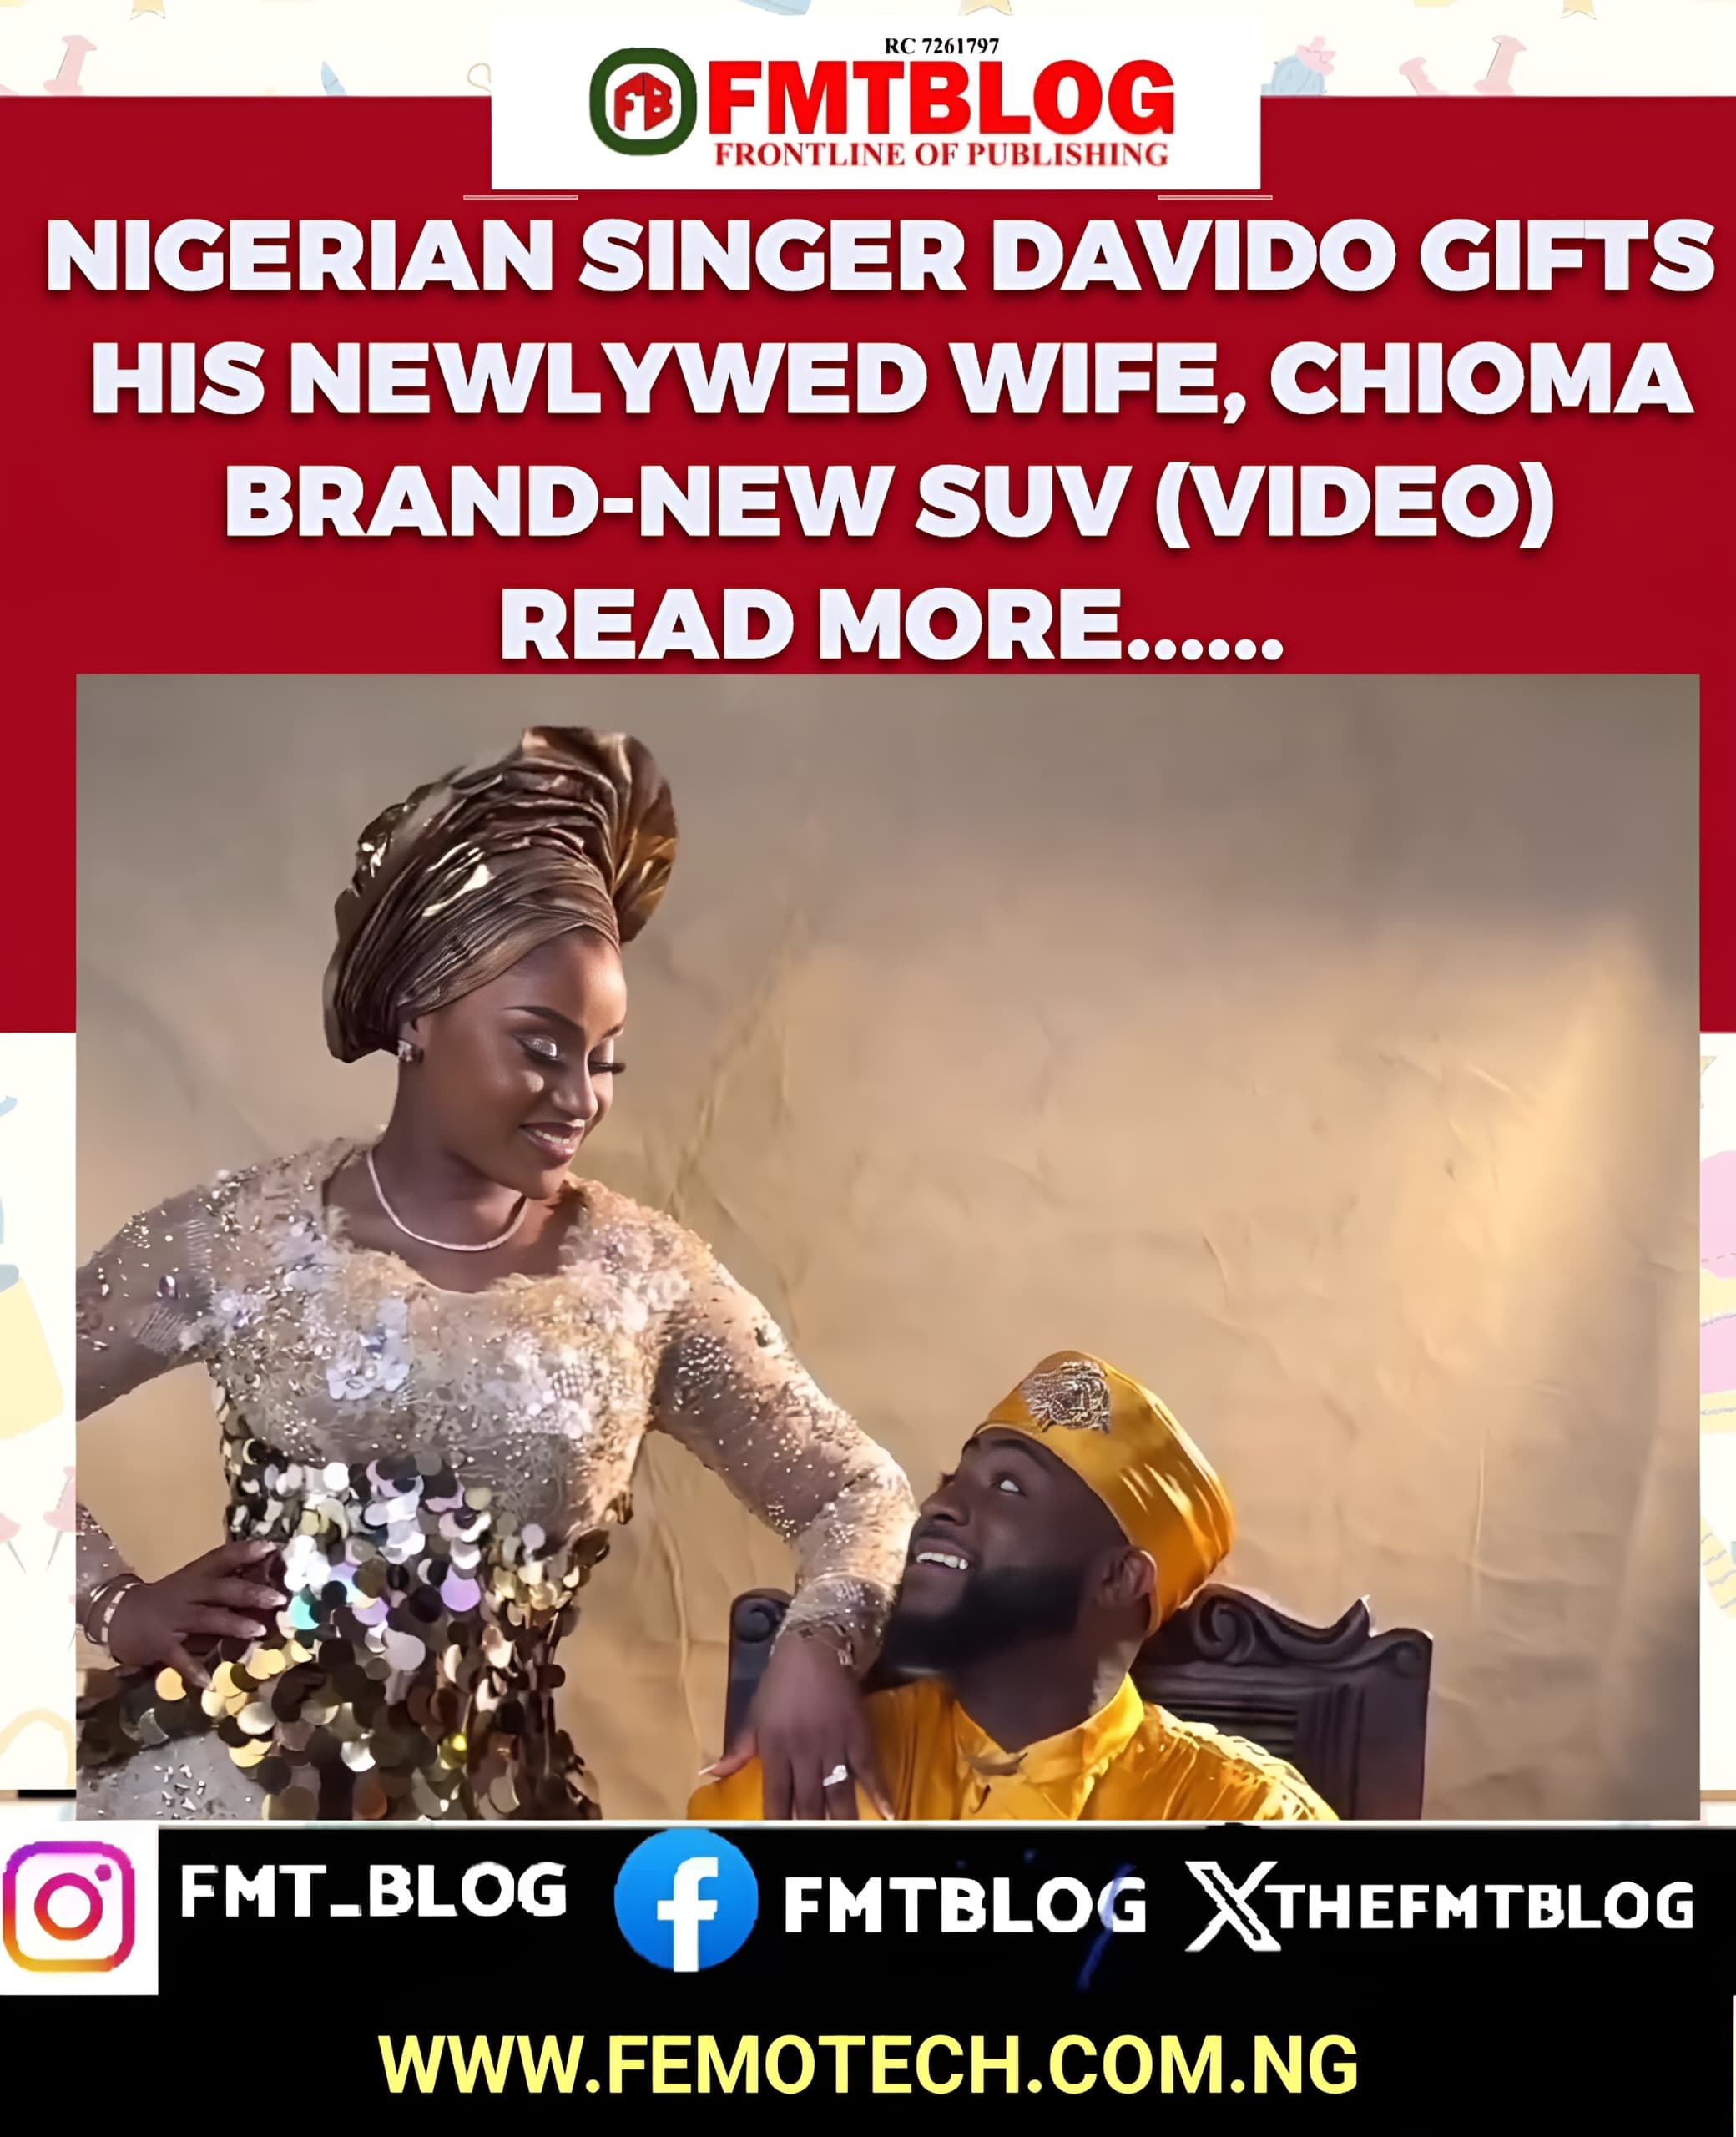 Nigerian Singer Davido Gifts His Newlywed Wife, Chioma Brand-New SUV(VIDEO)